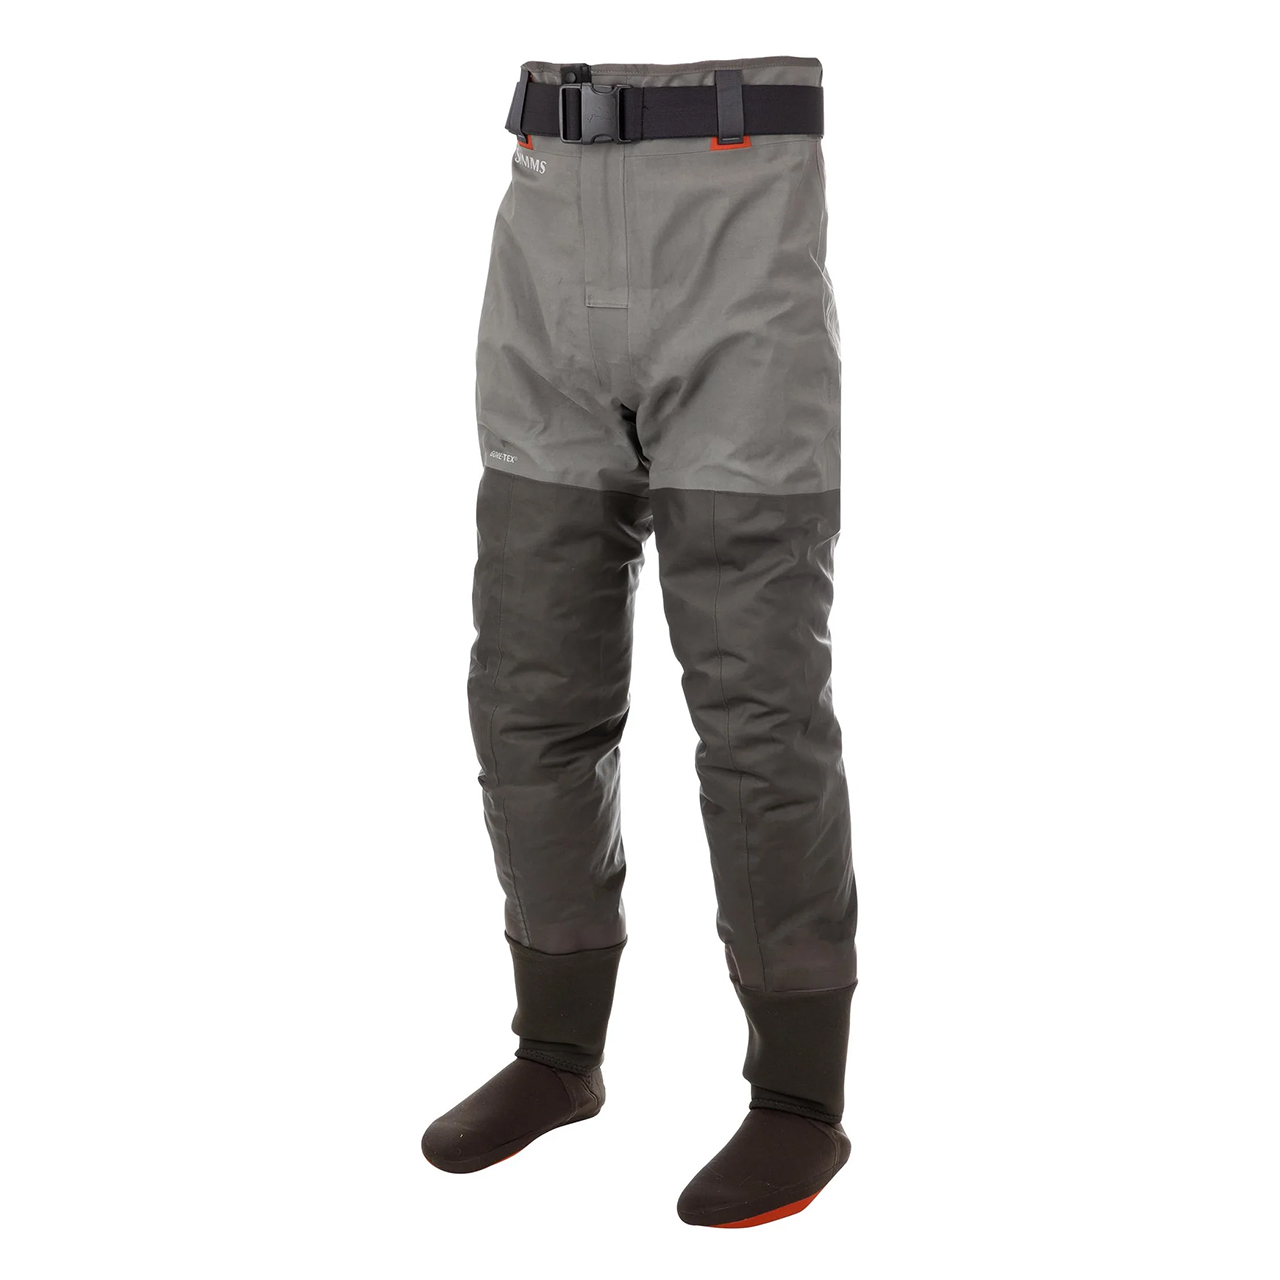 Mens Waterproof Fishing Waders And Hunting Chest Wader Breathable Outdoor  Life Pants With Hood And Stocking Foot From Moveupstore, $104.28 |  DHgate.Com